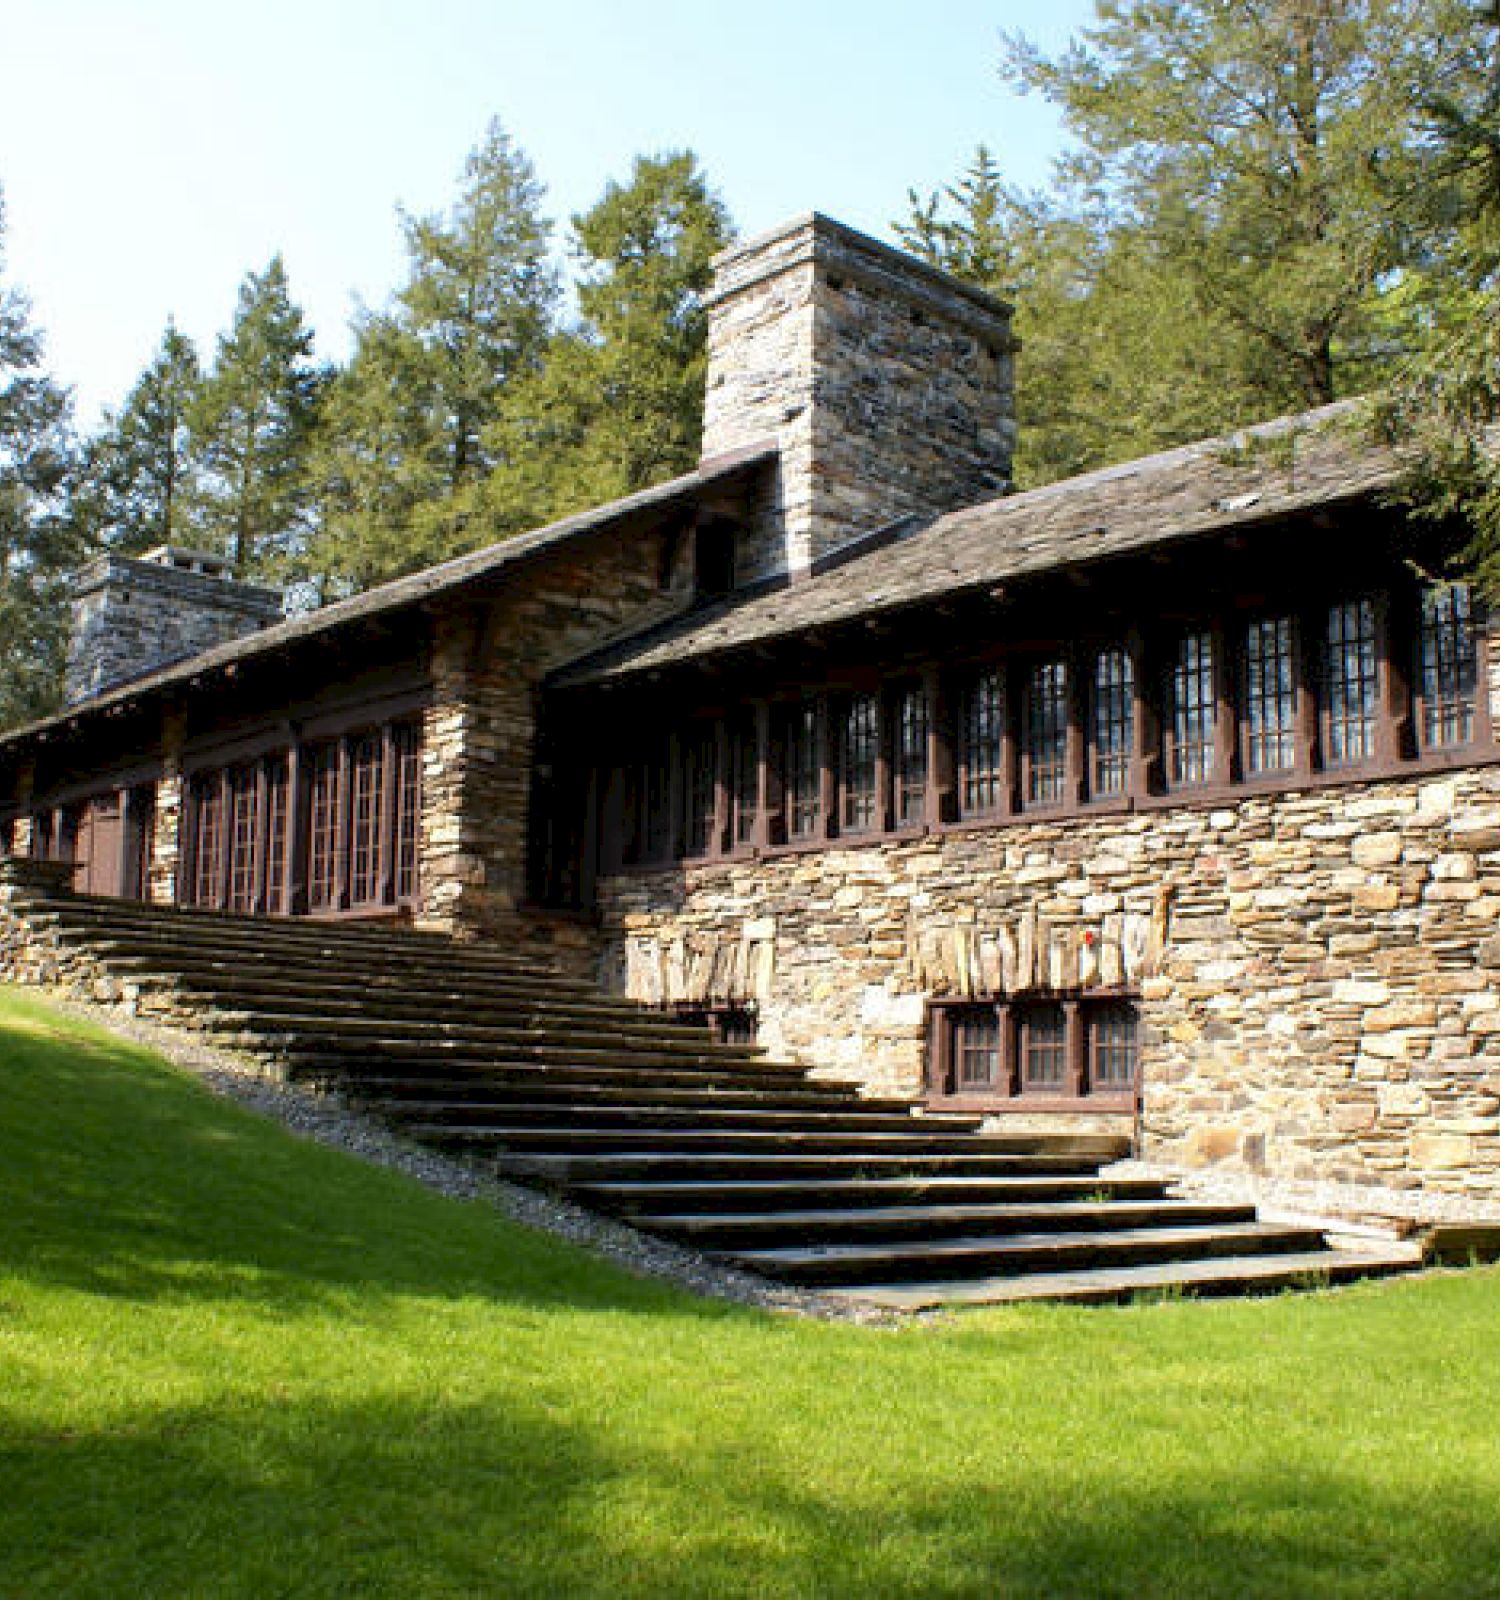 Stone building with large windows nestled in a lush forest setting.